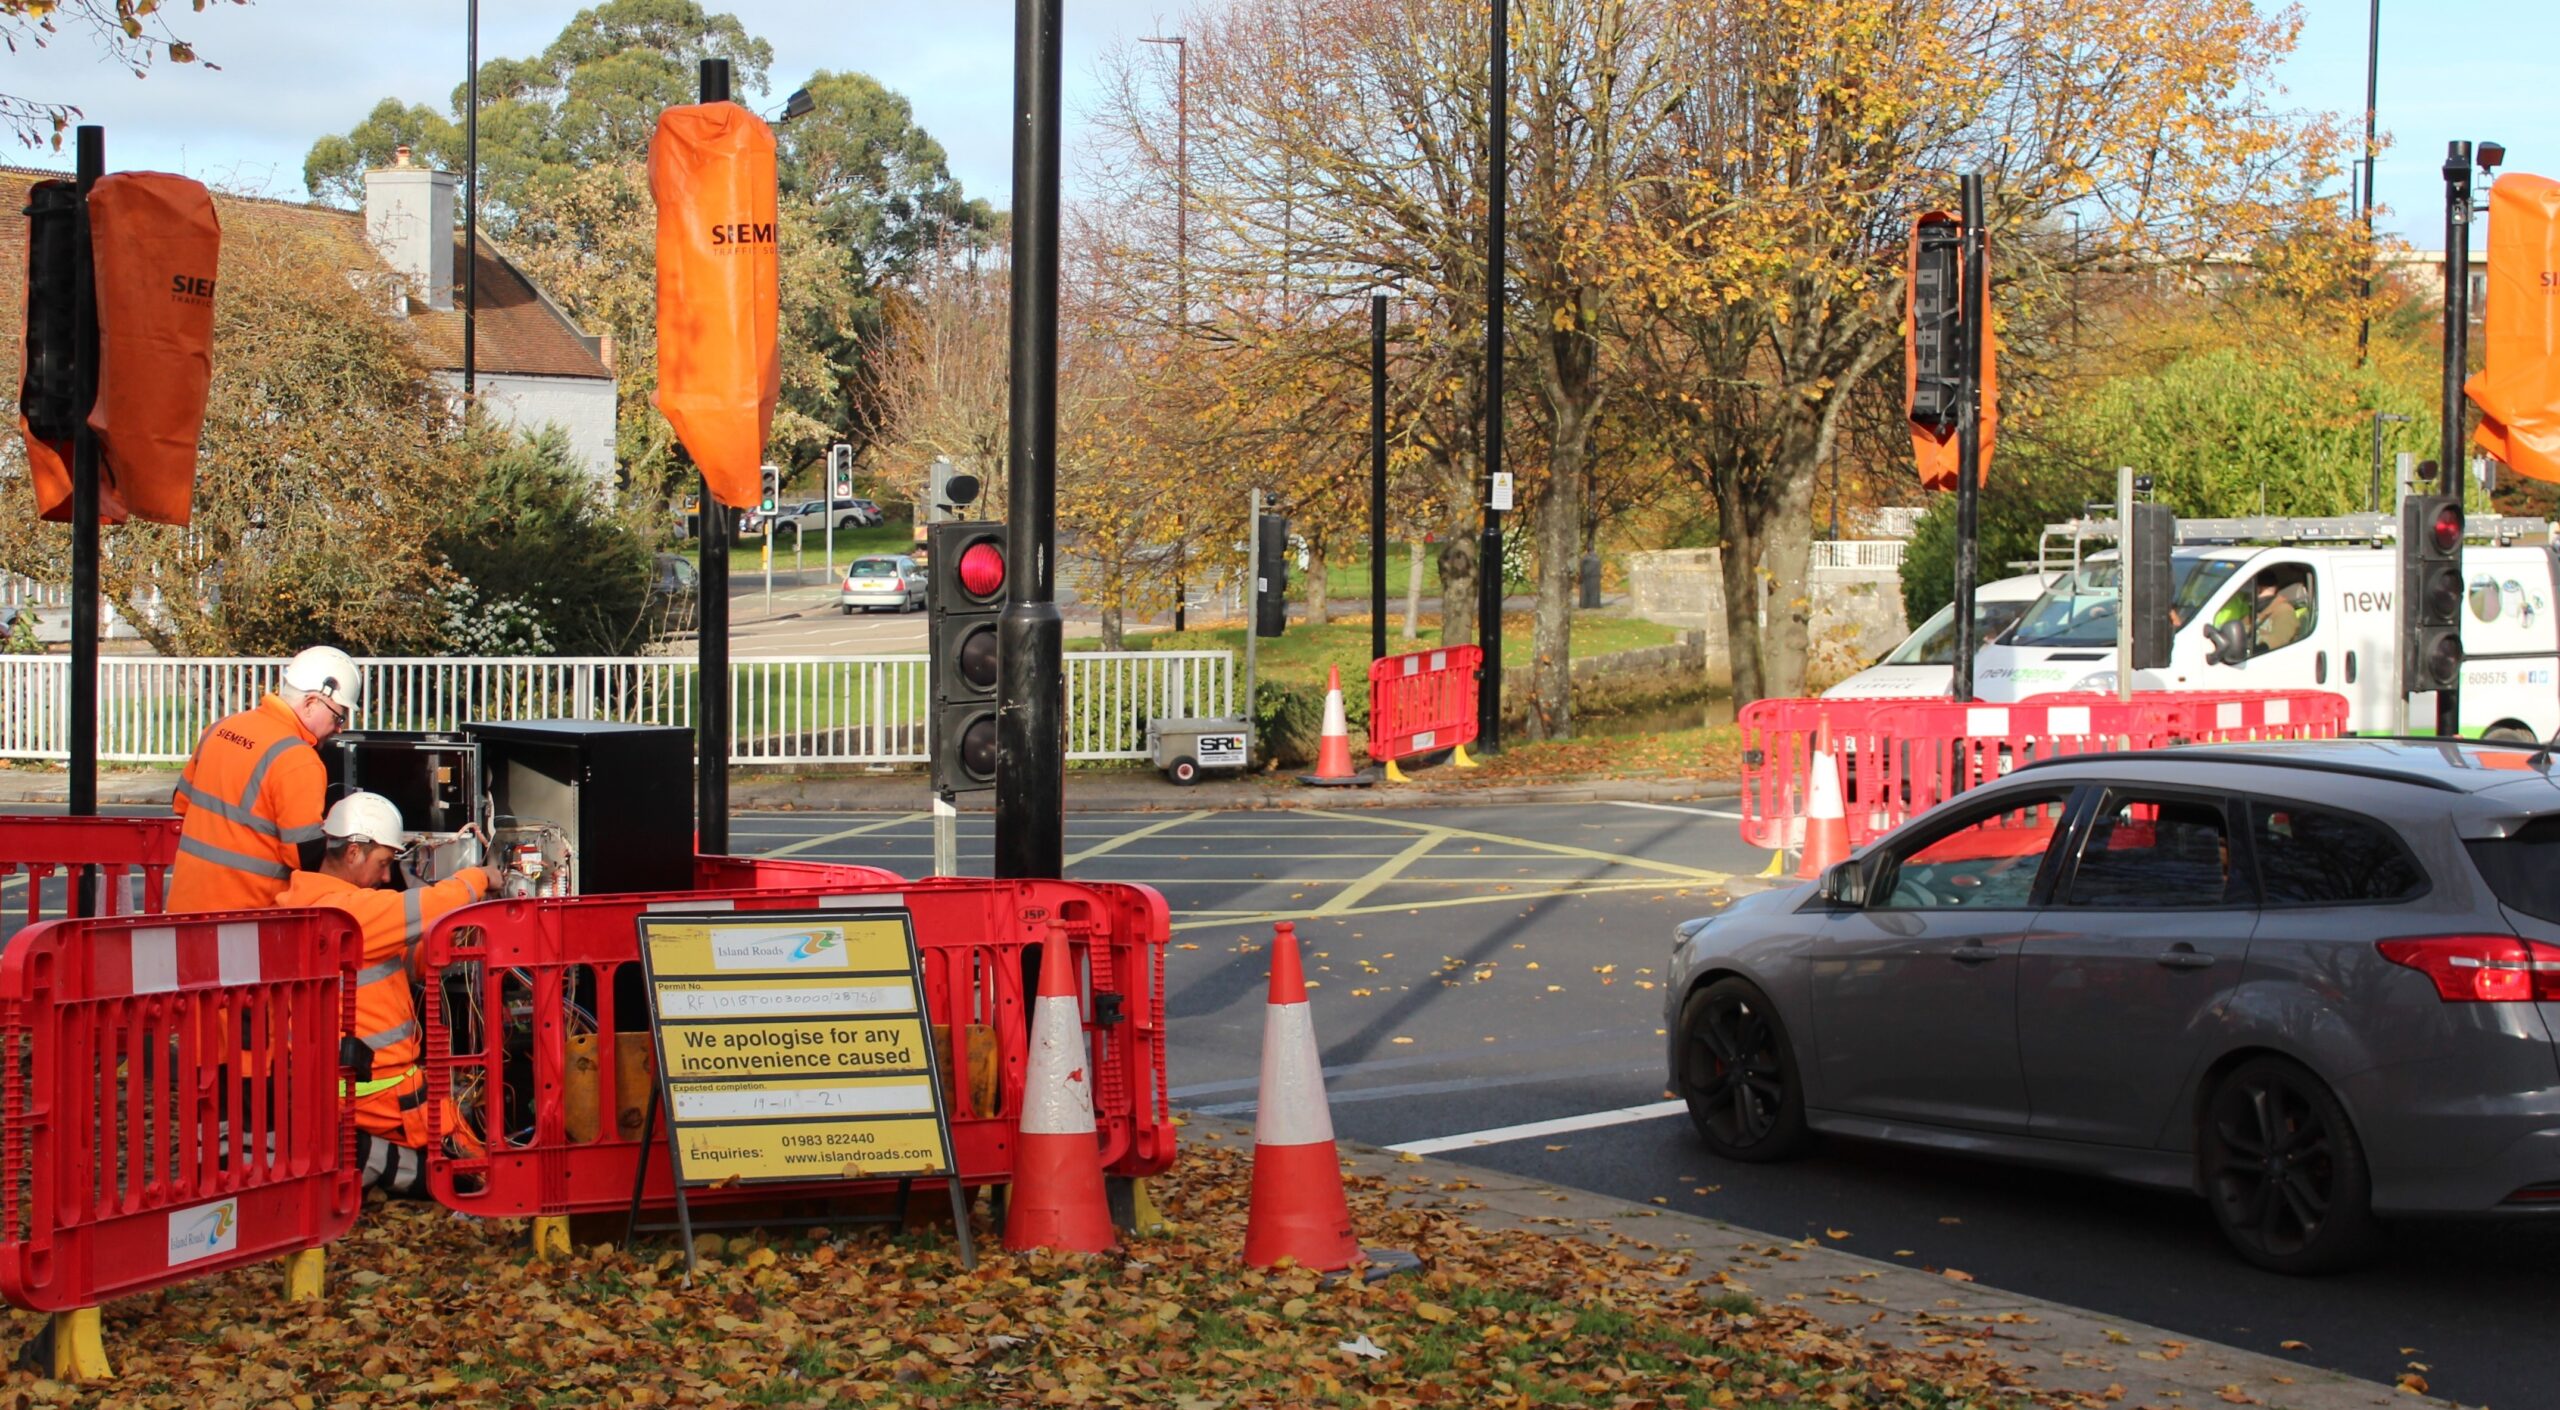 car stationary at roundabout traffic lights, other vehicles stationary on approach to the right, some traffic lights covered over with orange hoods, temporary traffic lights visible, two workman working on traffic signal box, leaves, traffic cones, signs and barriers in foreground, trees and houses in background